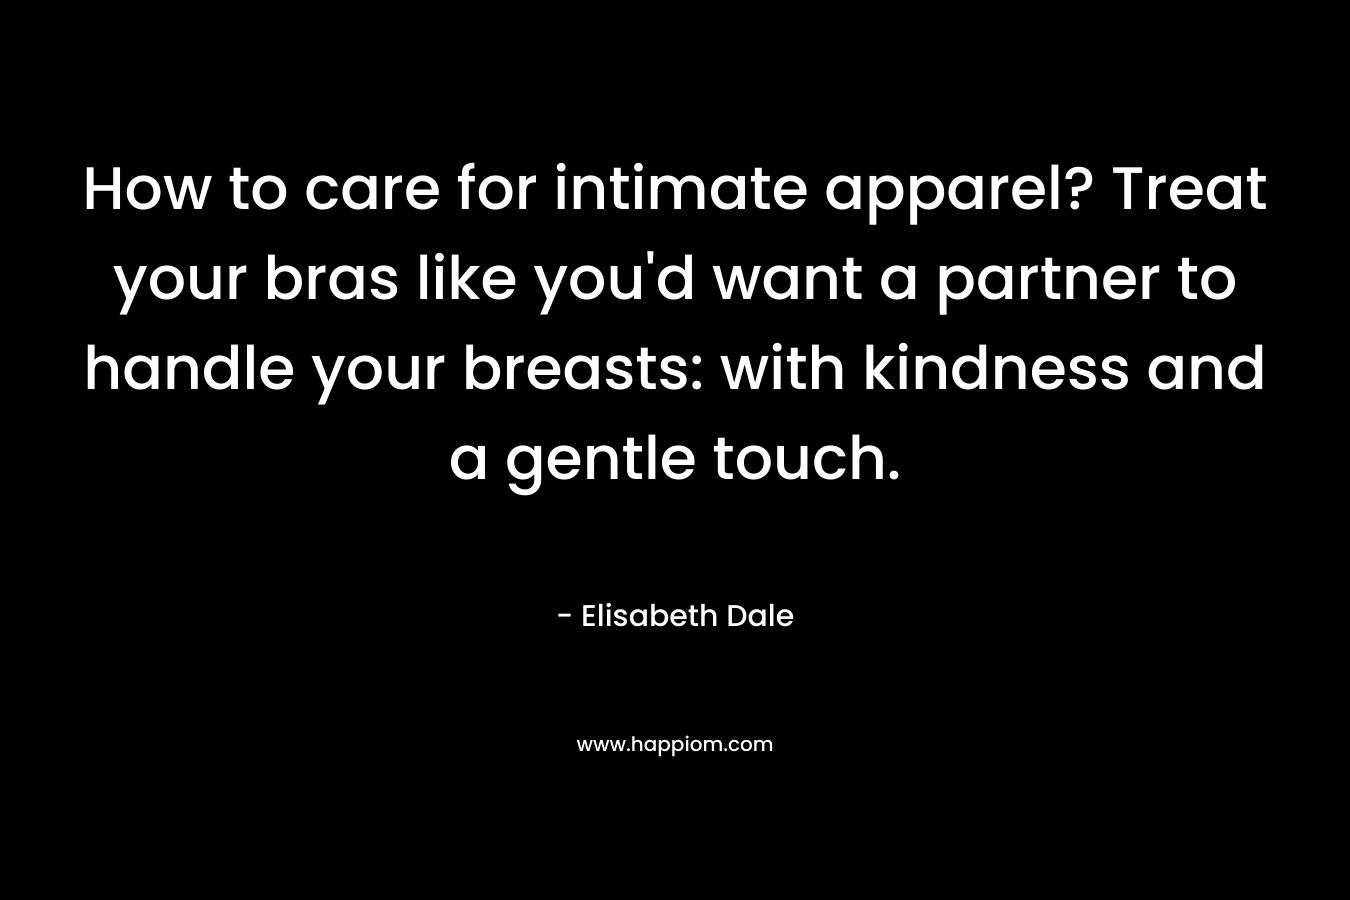 How to care for intimate apparel? Treat your bras like you'd want a partner to handle your breasts: with kindness and a gentle touch.